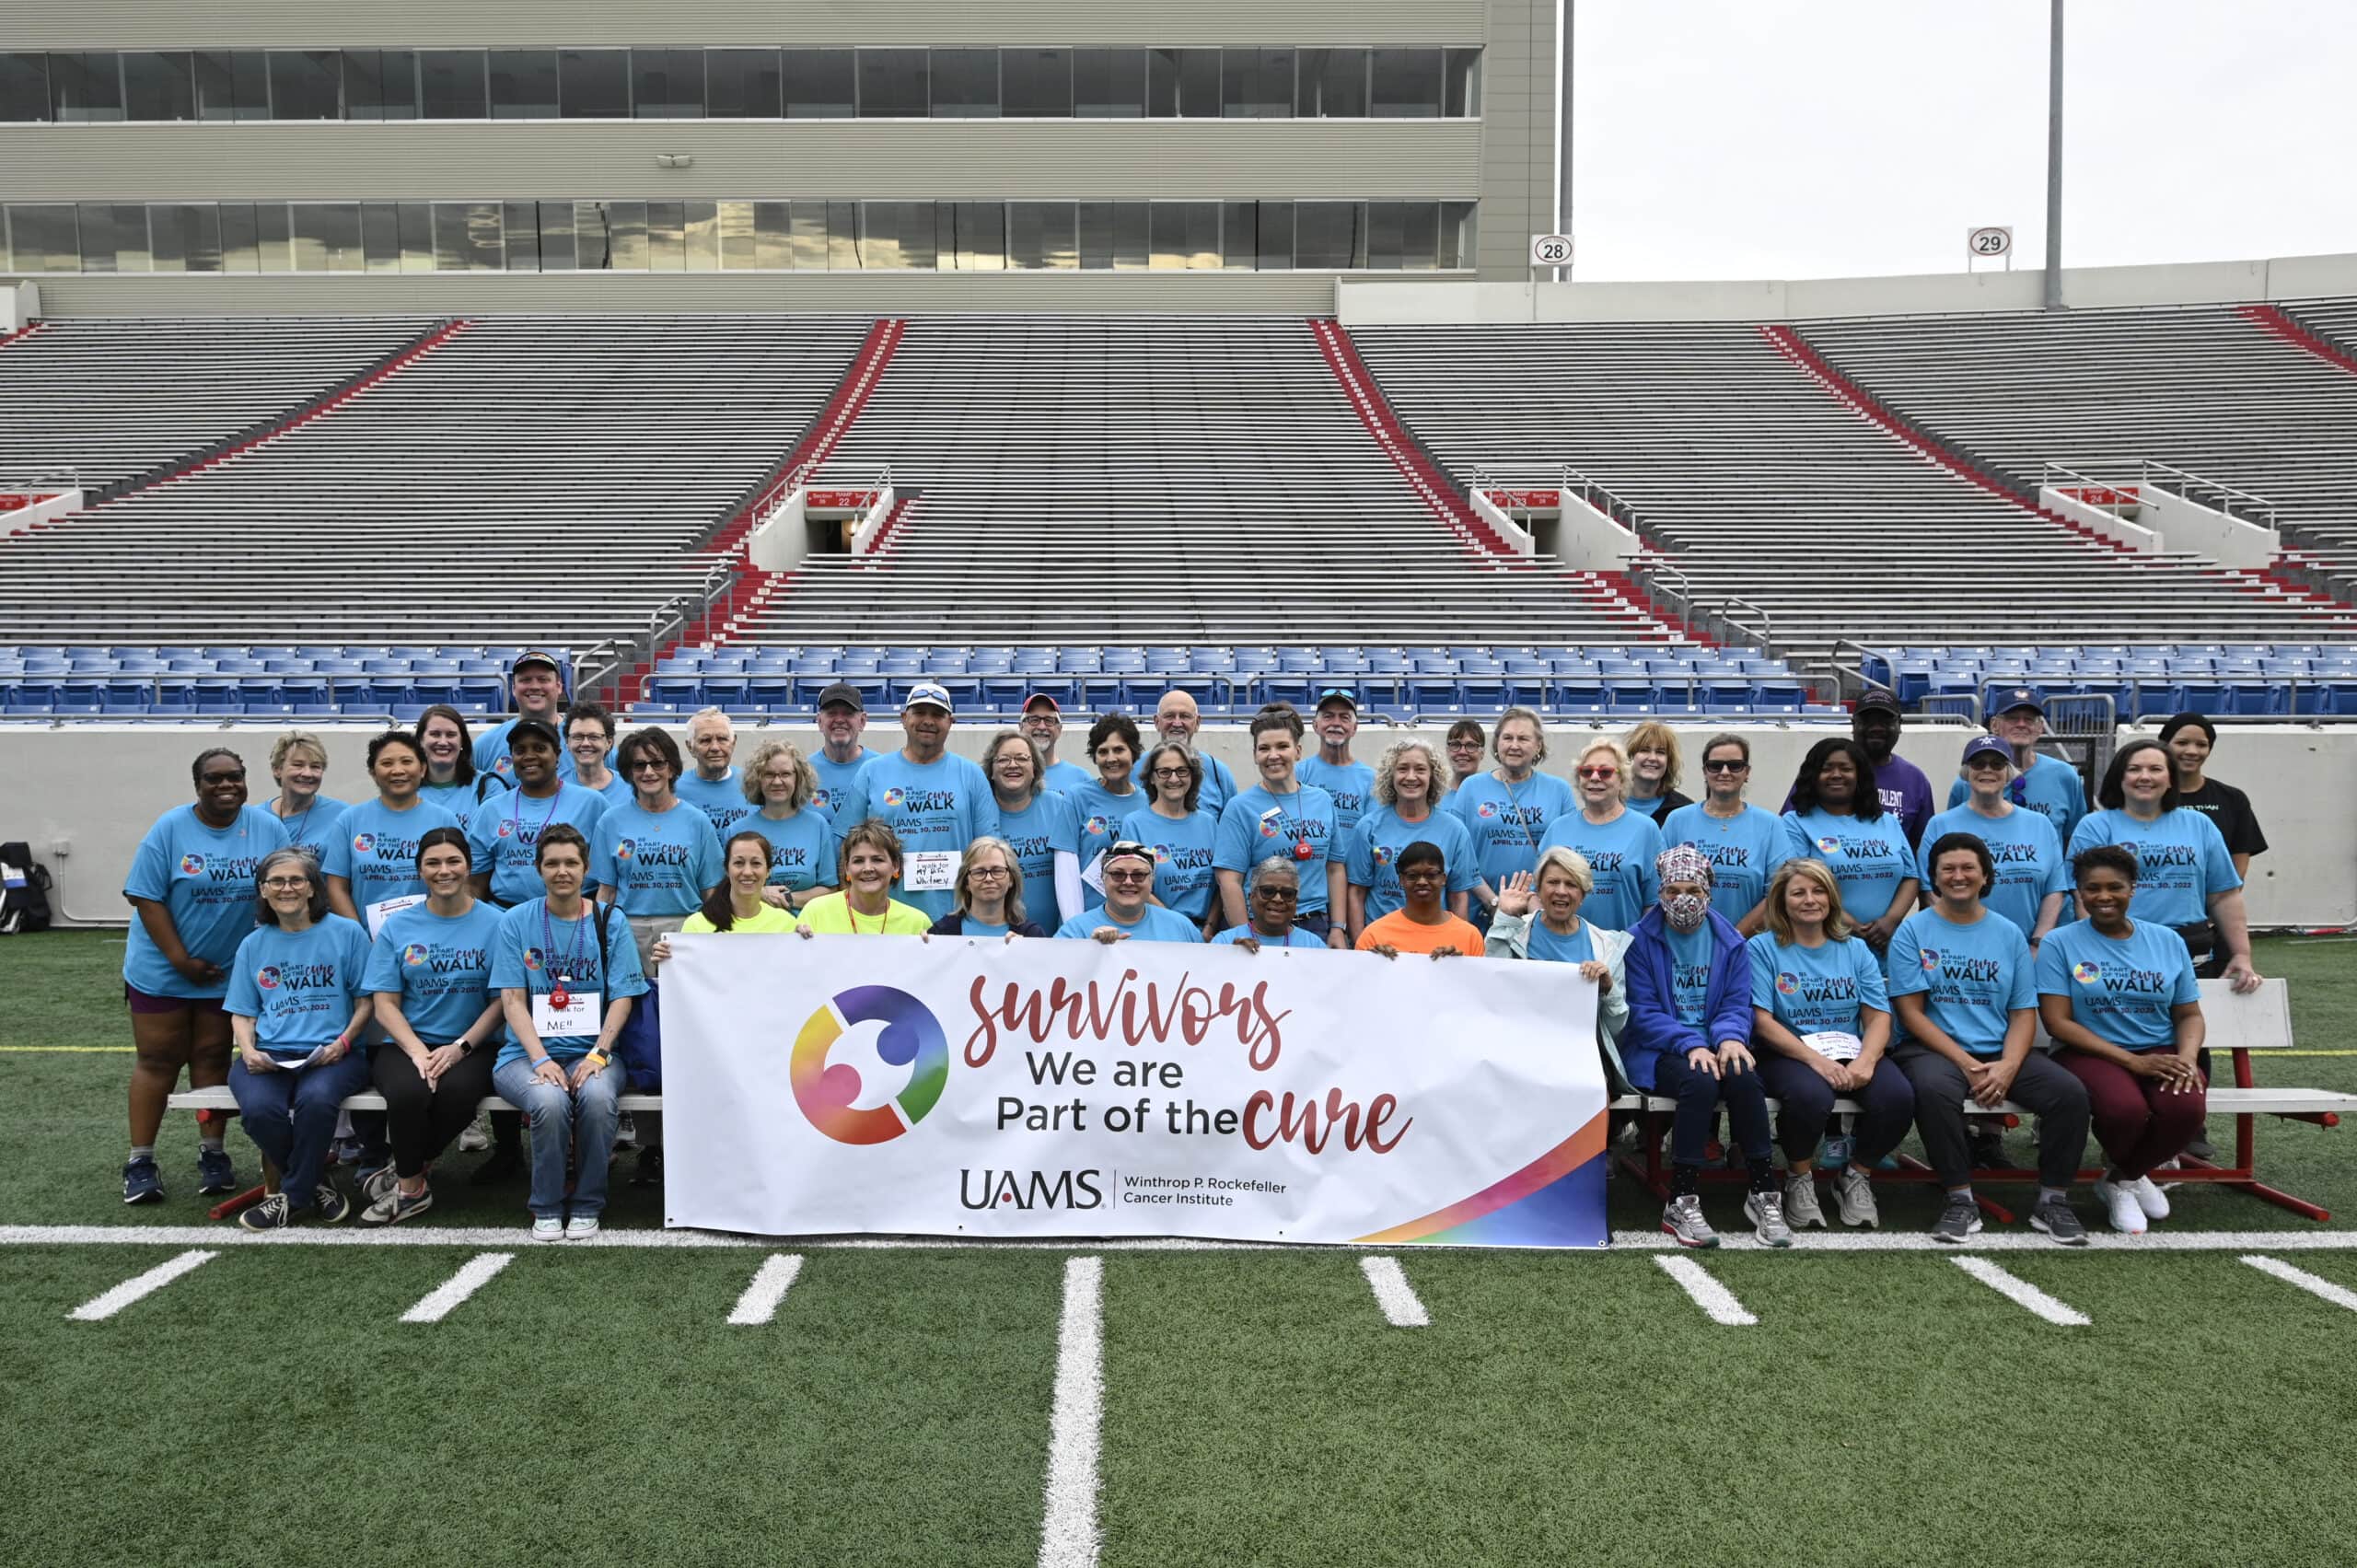 Cancer survivors were among the more than 1,000 walkers at the 2022 Be a Part of the Cure Walk. This year's event is set for May 6.